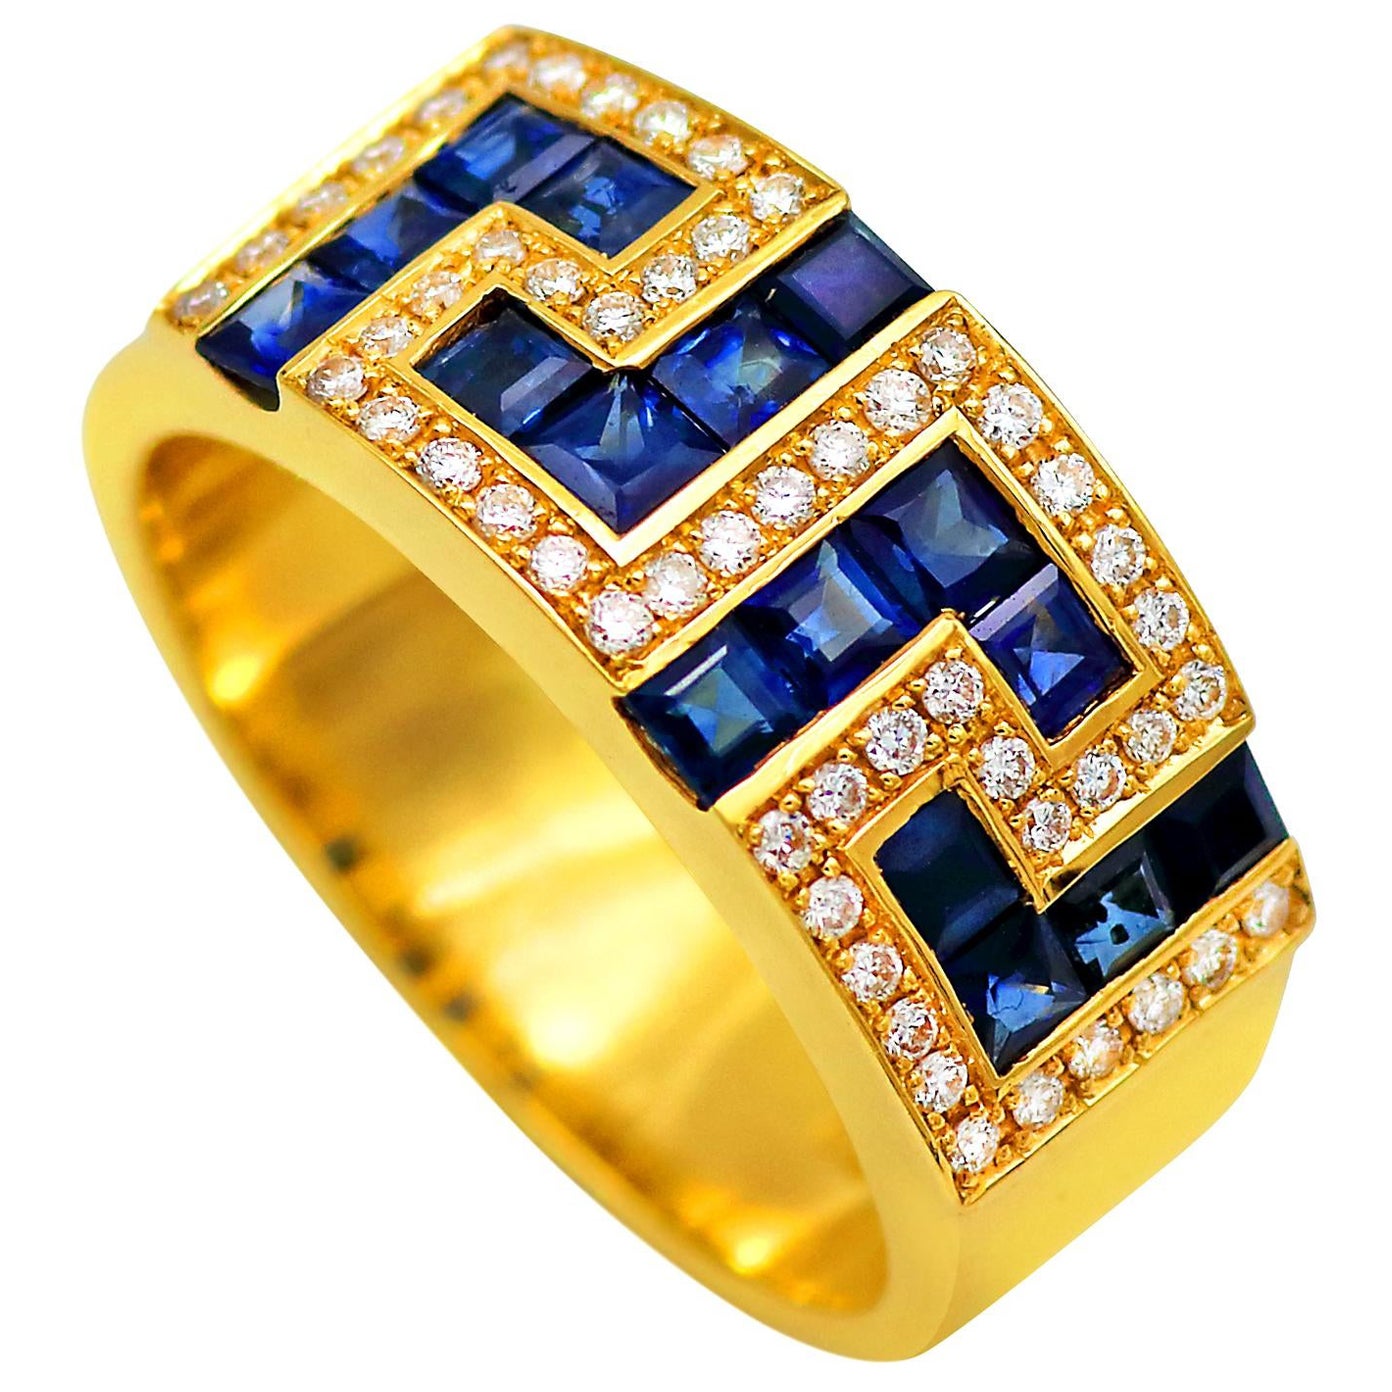 Dimos 18k Gold Greek Key Band Ring with Sapphires